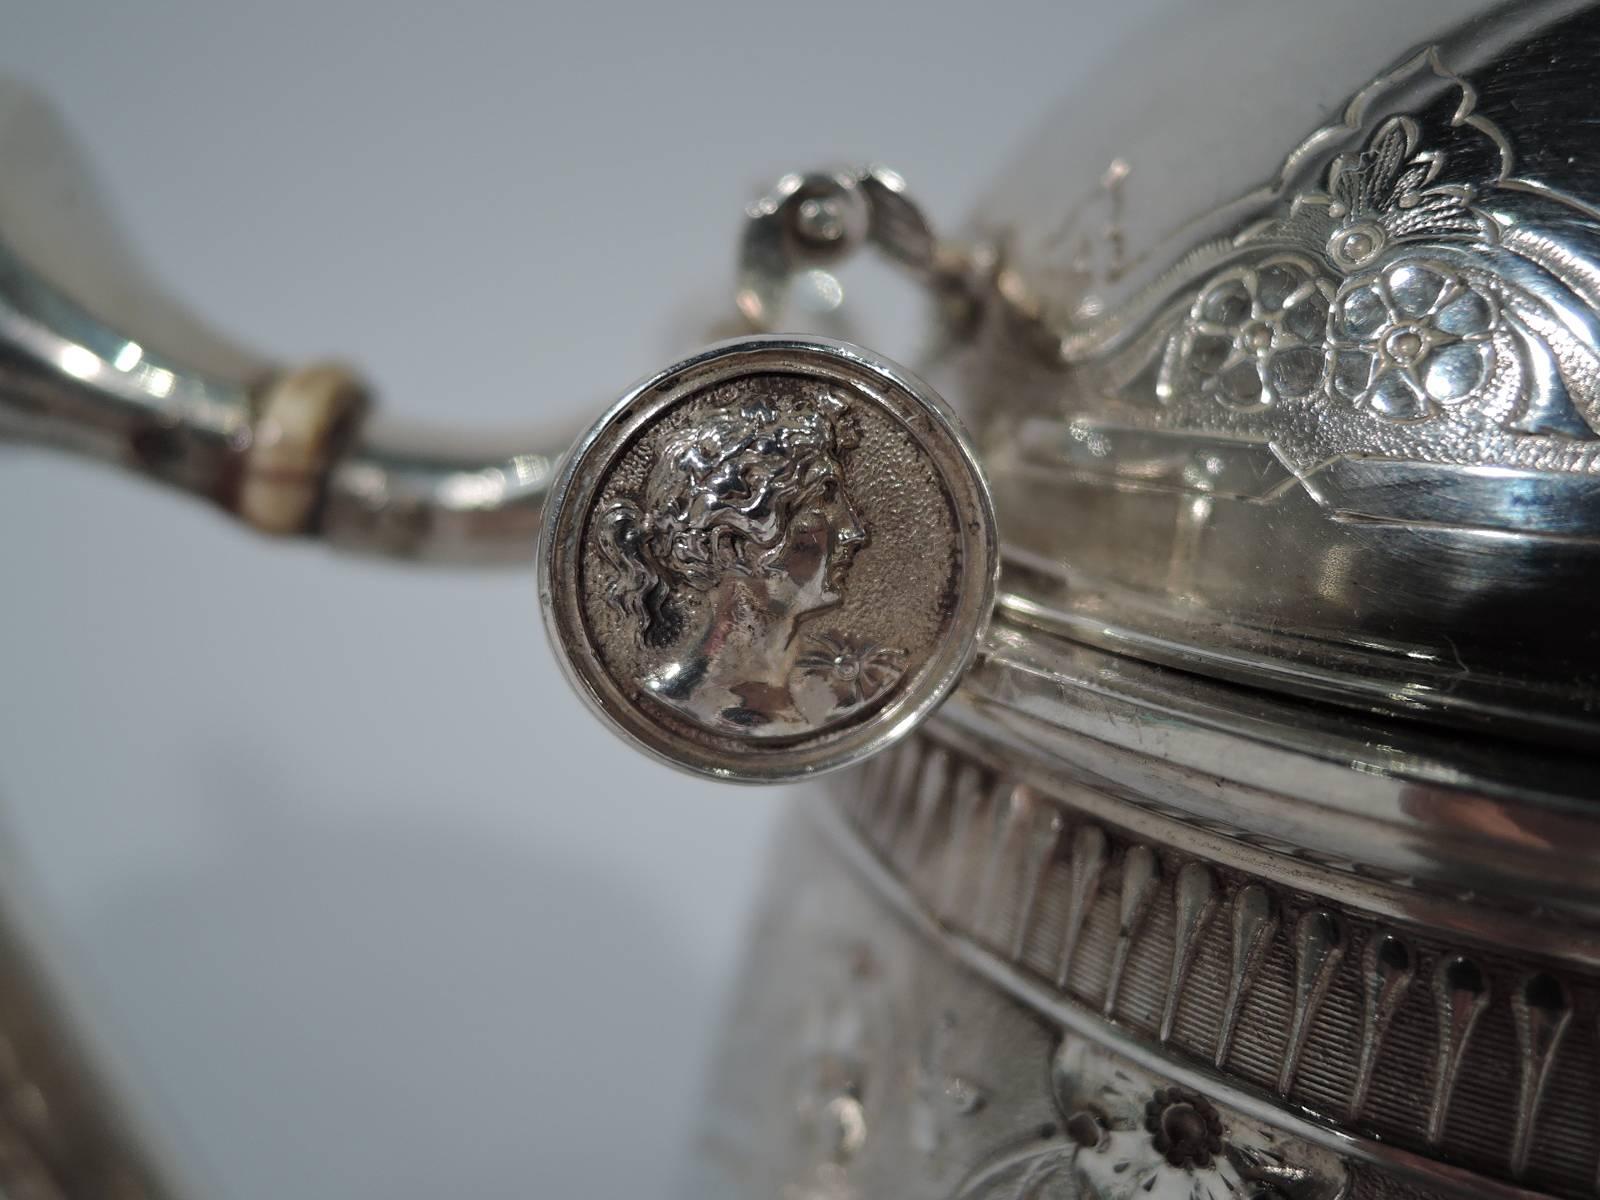 19th Century Antique Gorham Aesthetic Coin Silver Teapot with Medallions